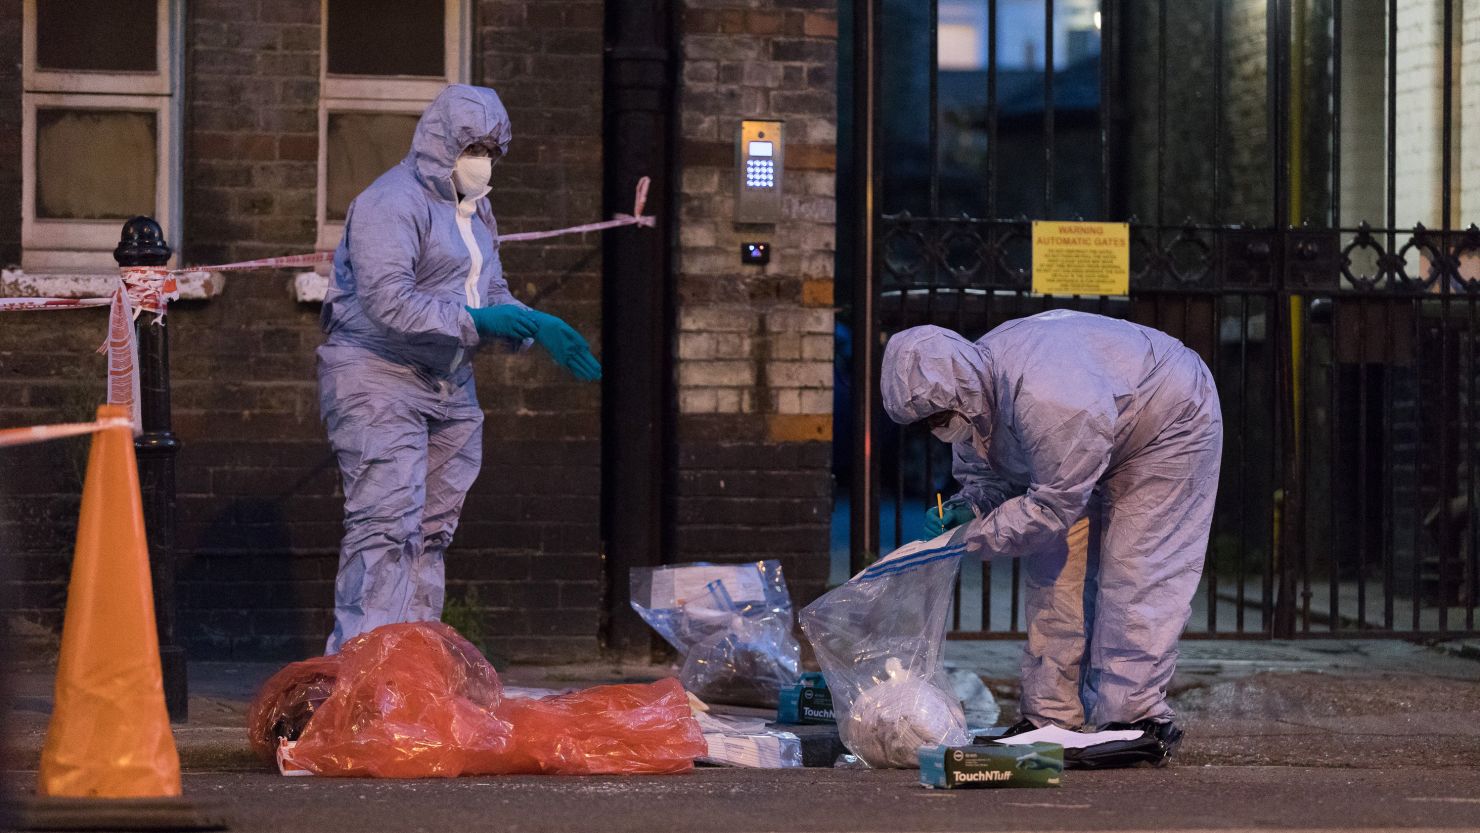 Forensic officers investigate a possible acid attack in east London Tuesday night.